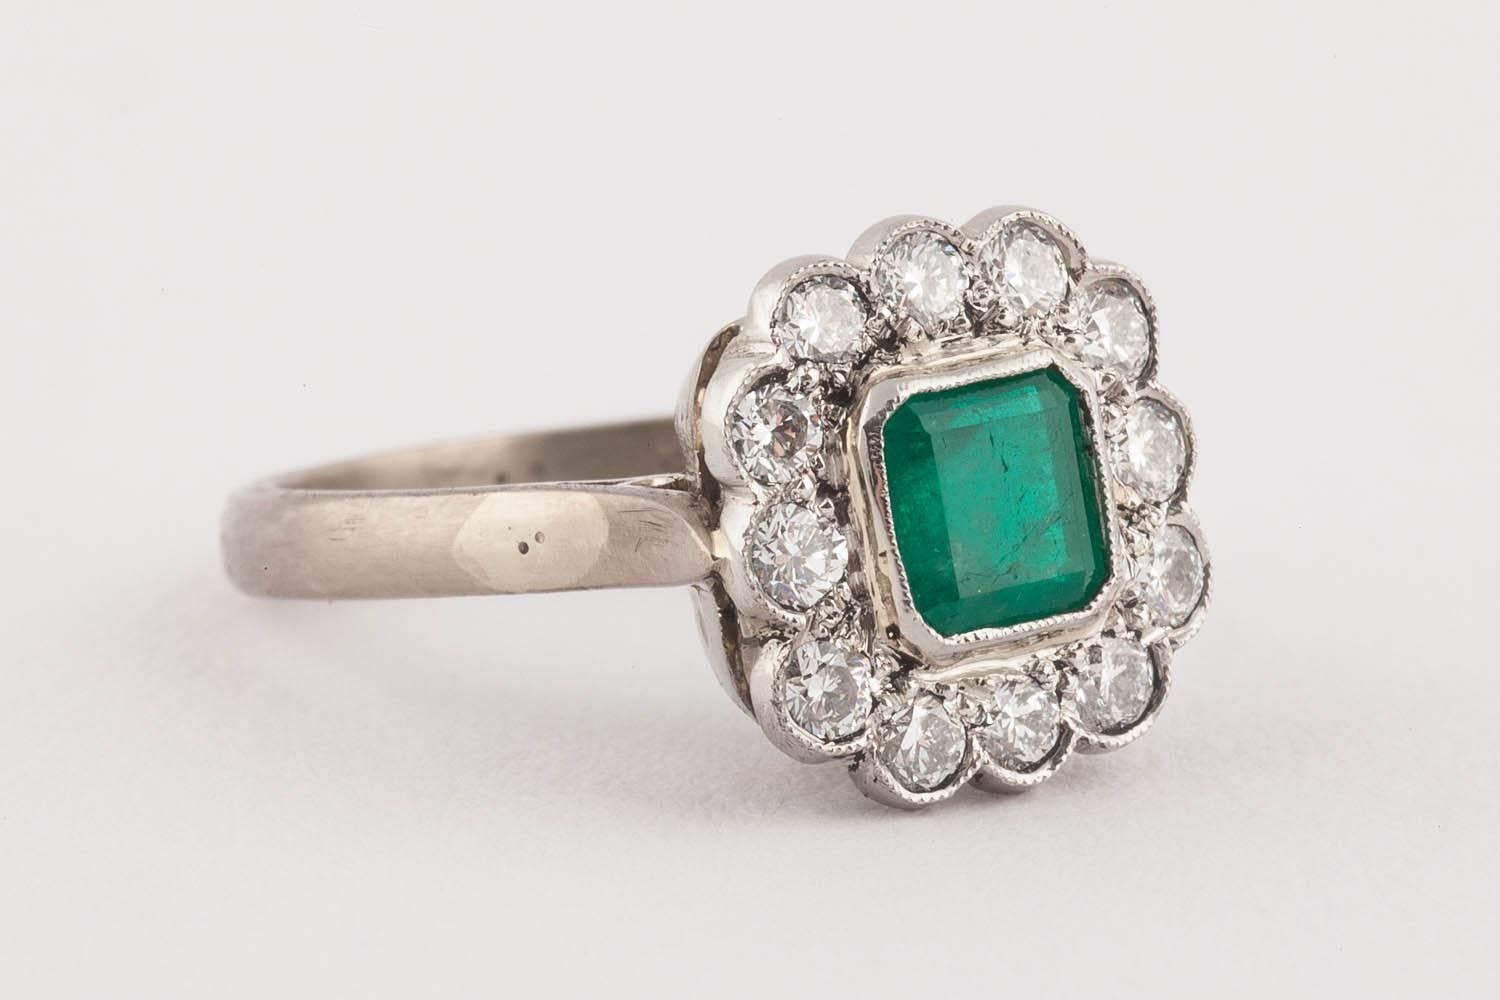 A beautiful square cut emerald and diamond cluster ring set with a vivid green emerald, surrounded by twelve bright diamonds, in millegrain setting, mounted in 18k white gold.

Mid 20th century. Marked 18ct.

Size 5 1/2.

Ring box illustrated is for